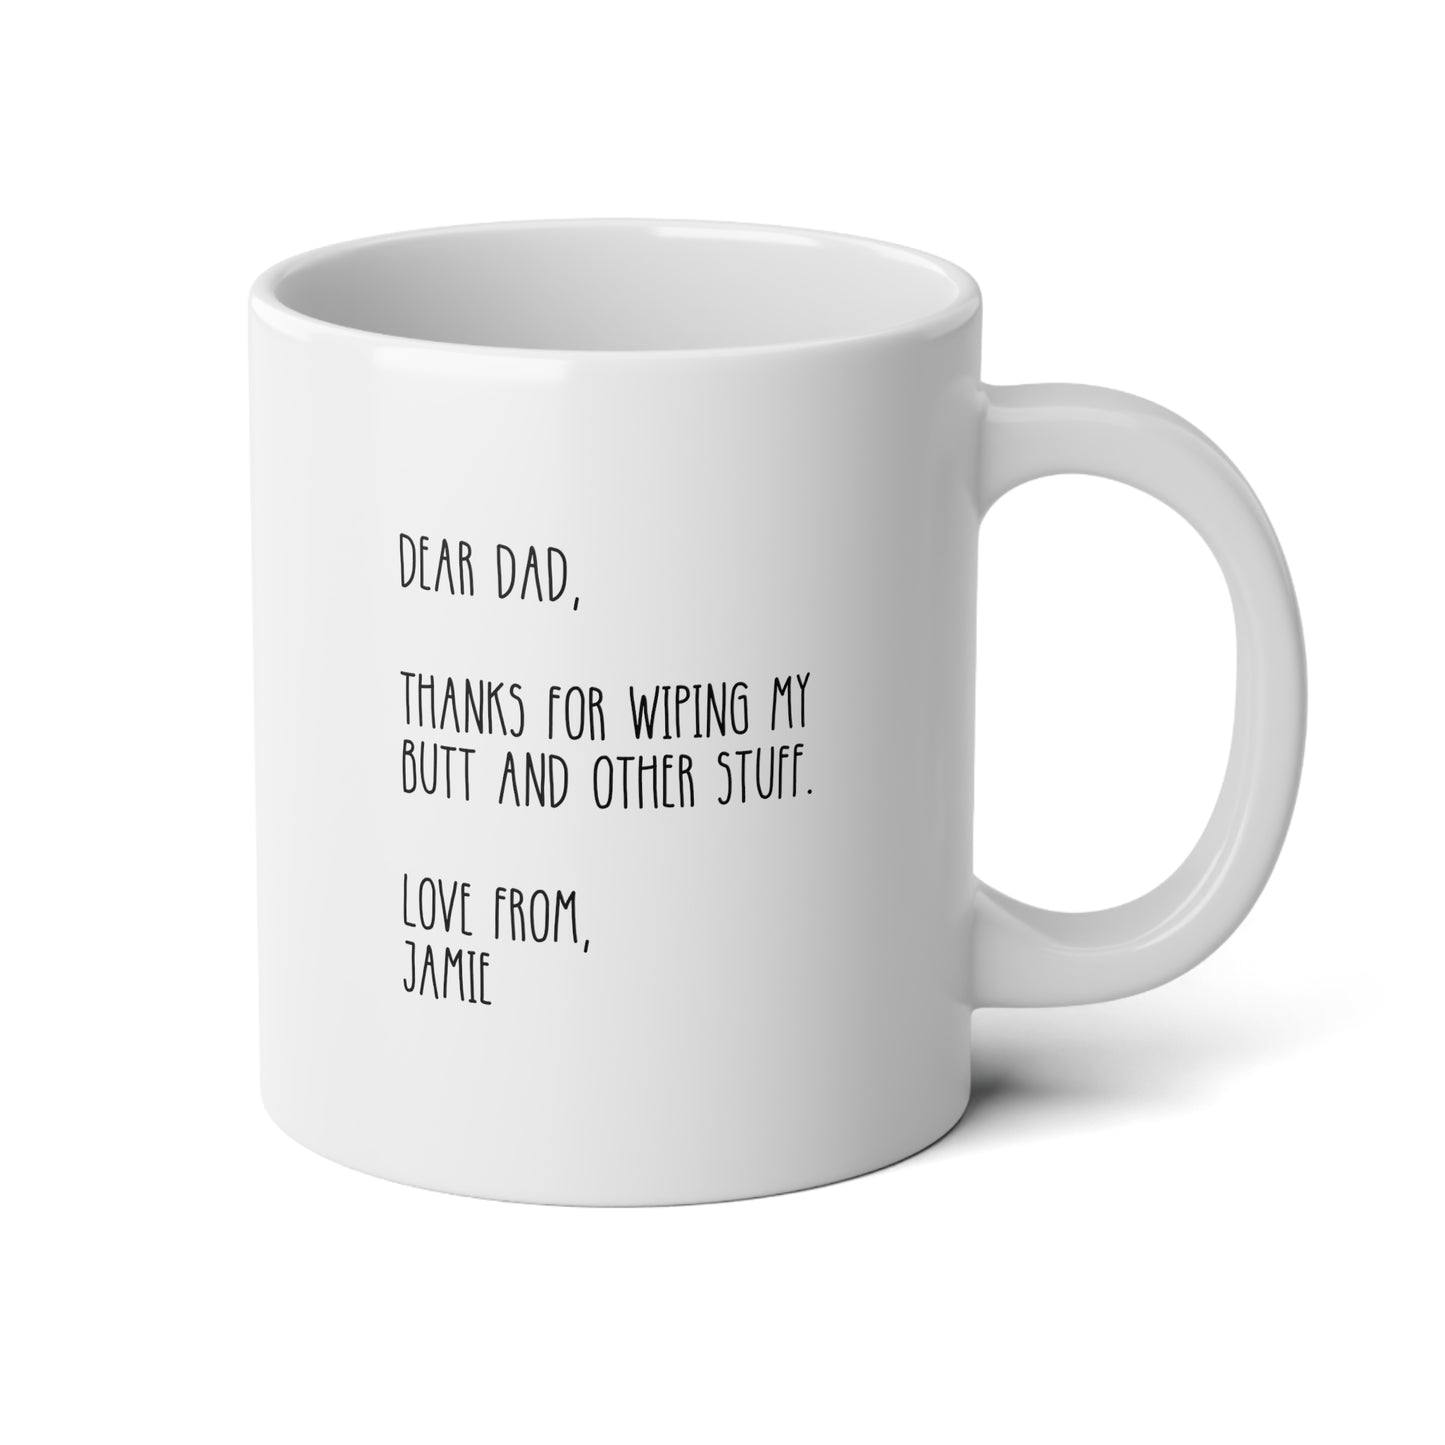 Dear Dad Thanks For Wiping My Butt And Other Stuff 20oz white funny large coffee mug gift for dad fathers day novelty gag papa custom name waveywares wavey wares wavywares wavy wares